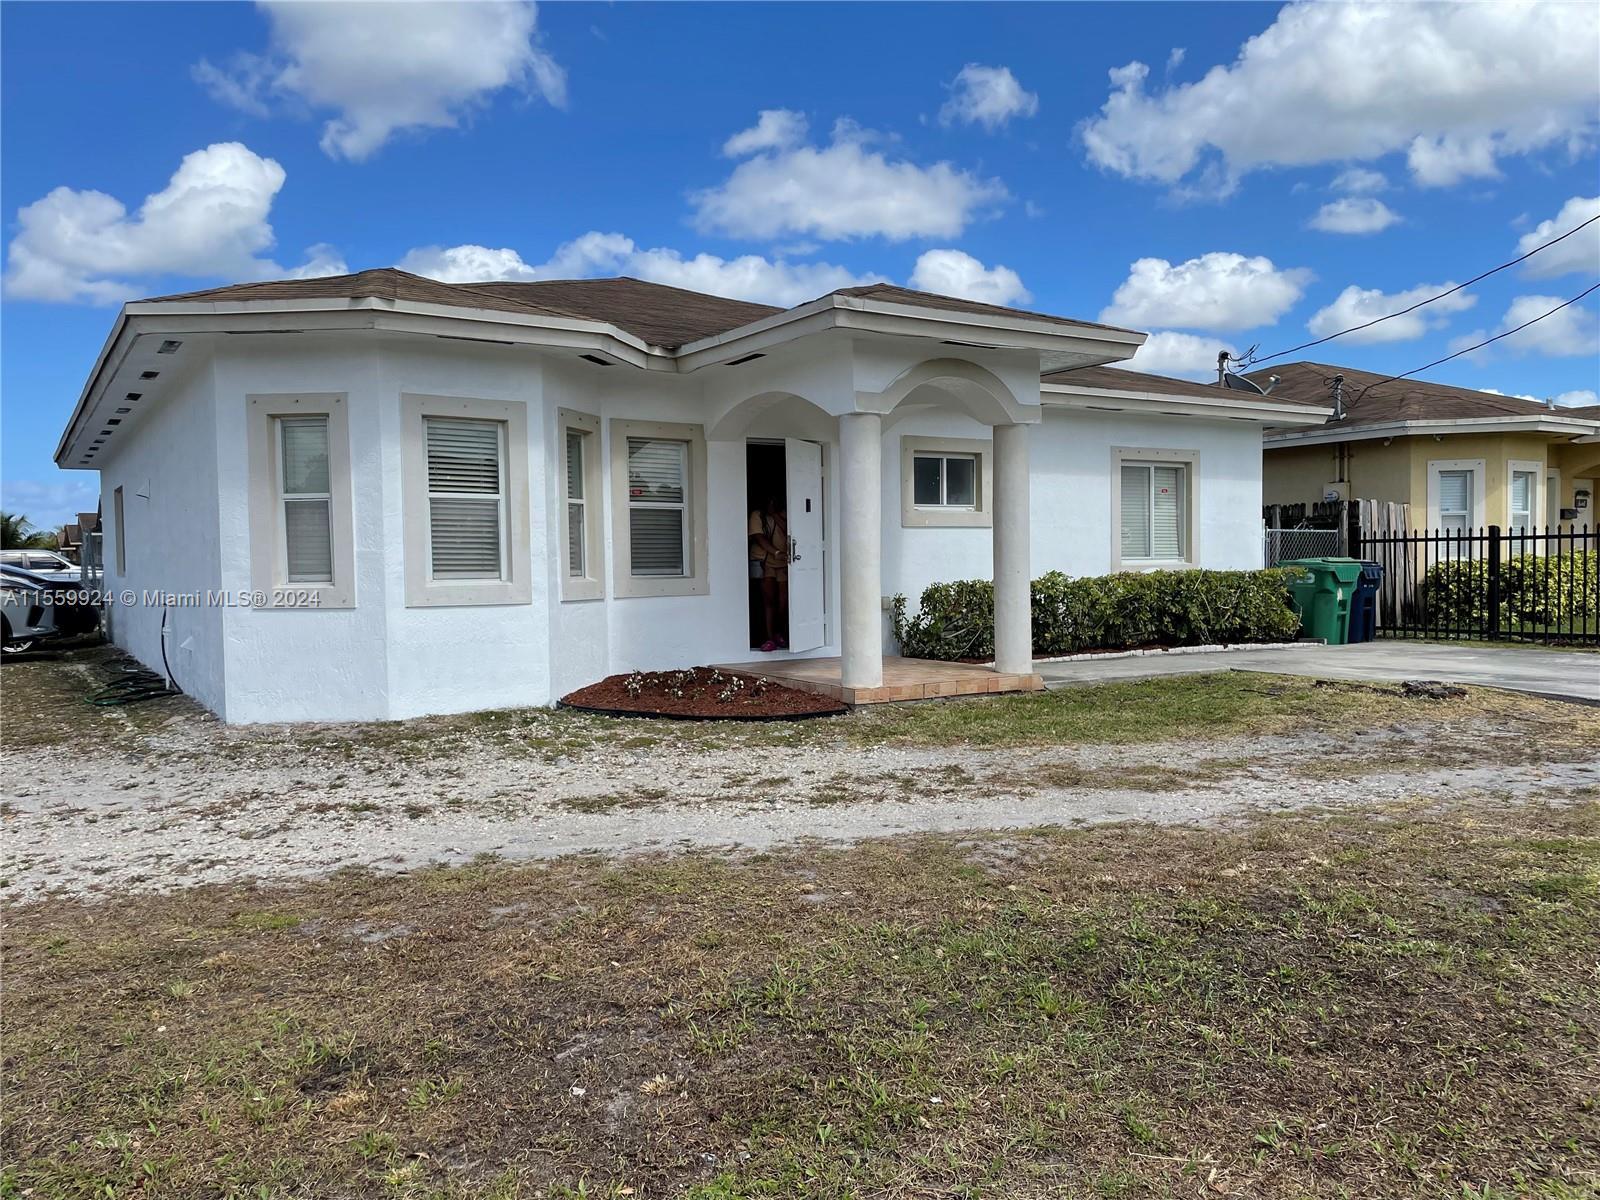 Photo of 18819 NW 37th Ave in Miami Gardens, FL